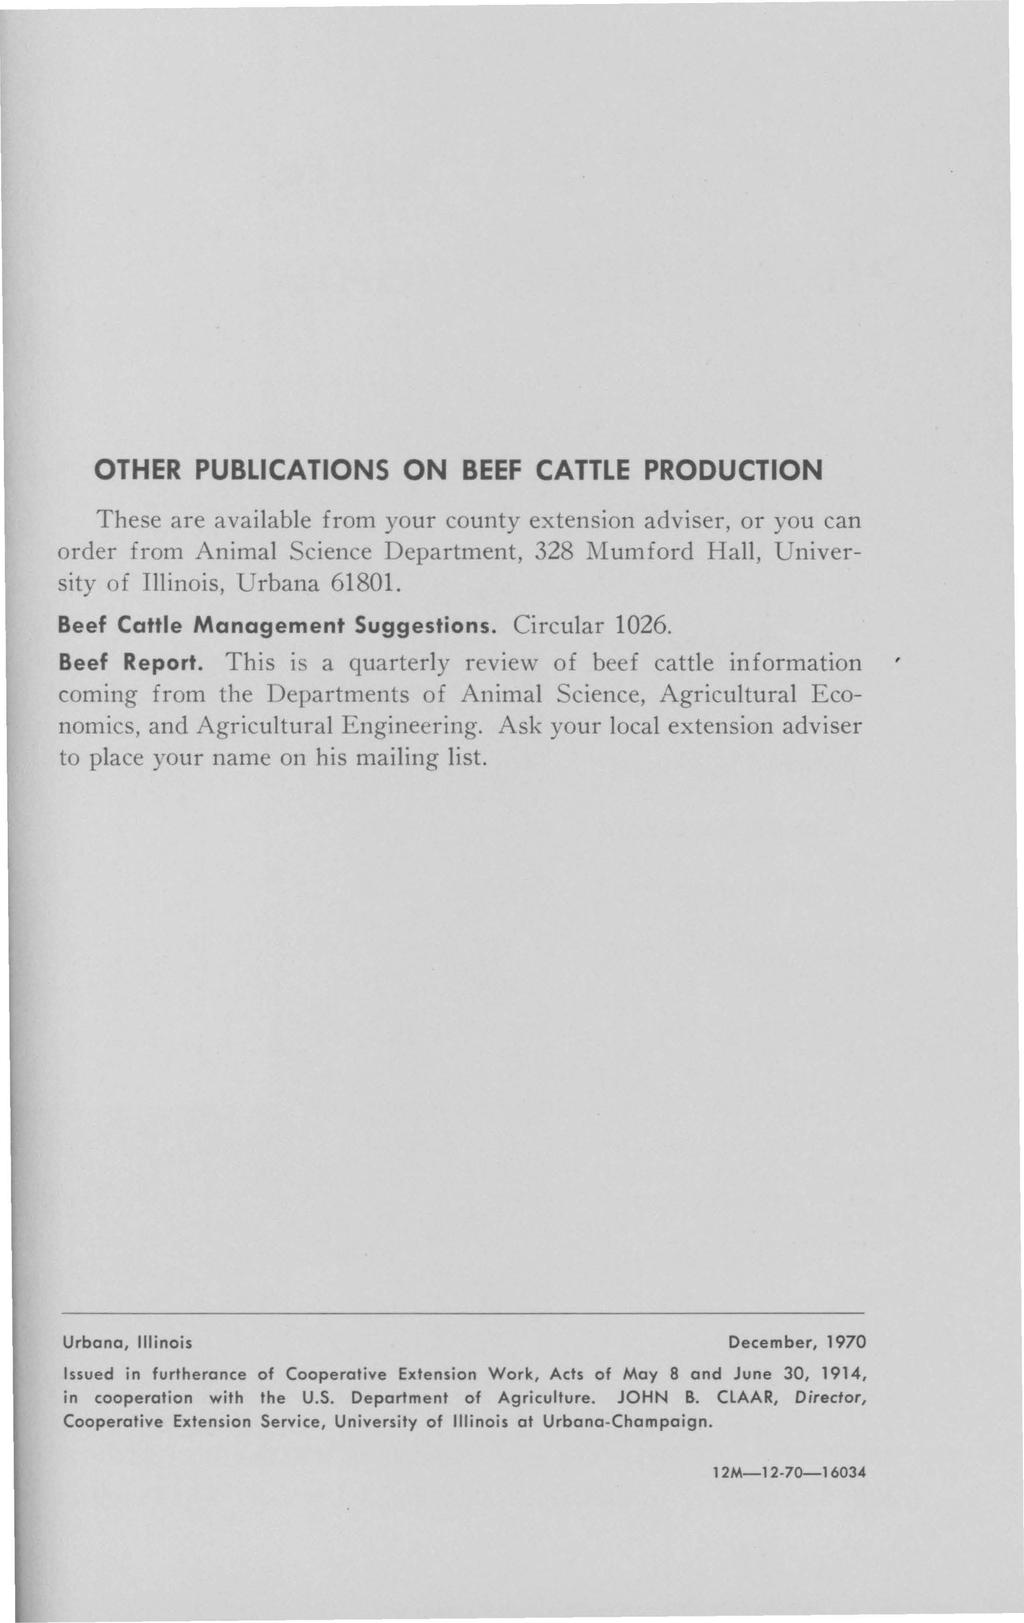 OTHER PUBLICATIONS ON BEEF CATTLE PRODUCTION These are available from your county extension adviser, or you can order from Animal Science Department, 328 Mumford Hall, University of Illinois, Urbana